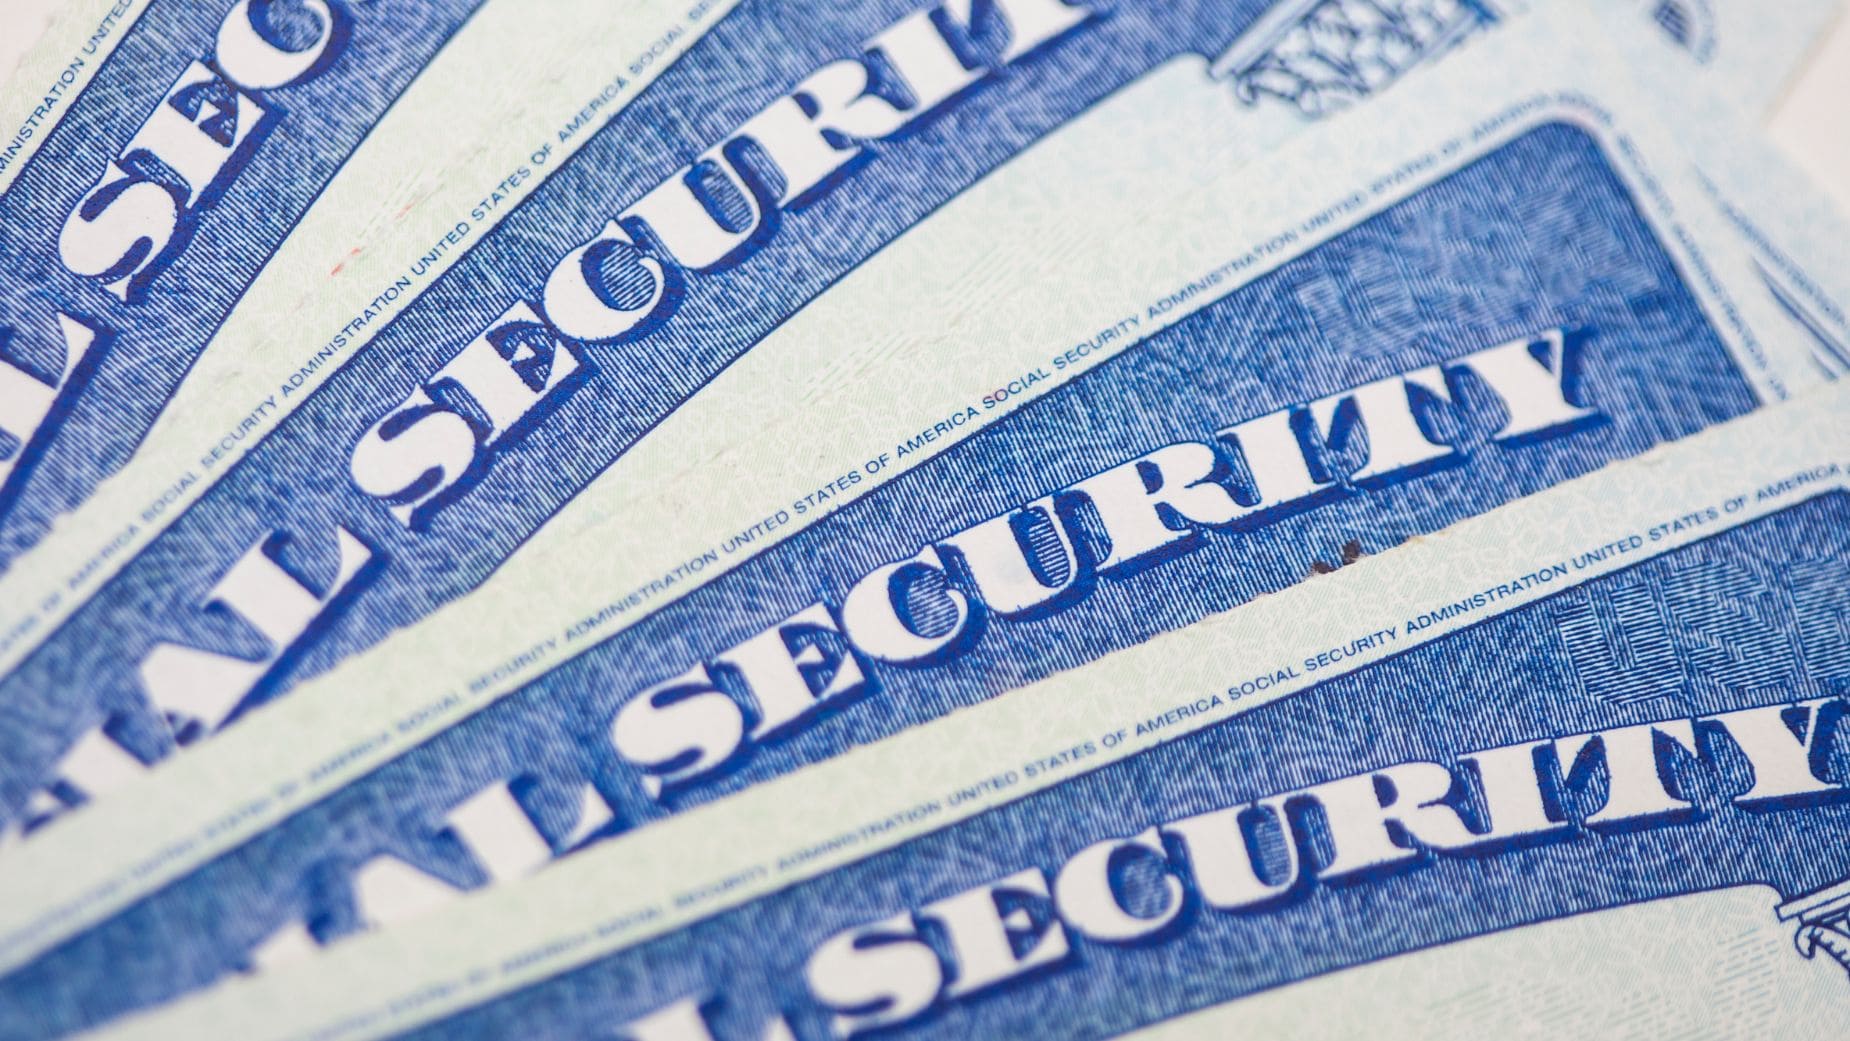 Find out if you will get the last social Security payment of March